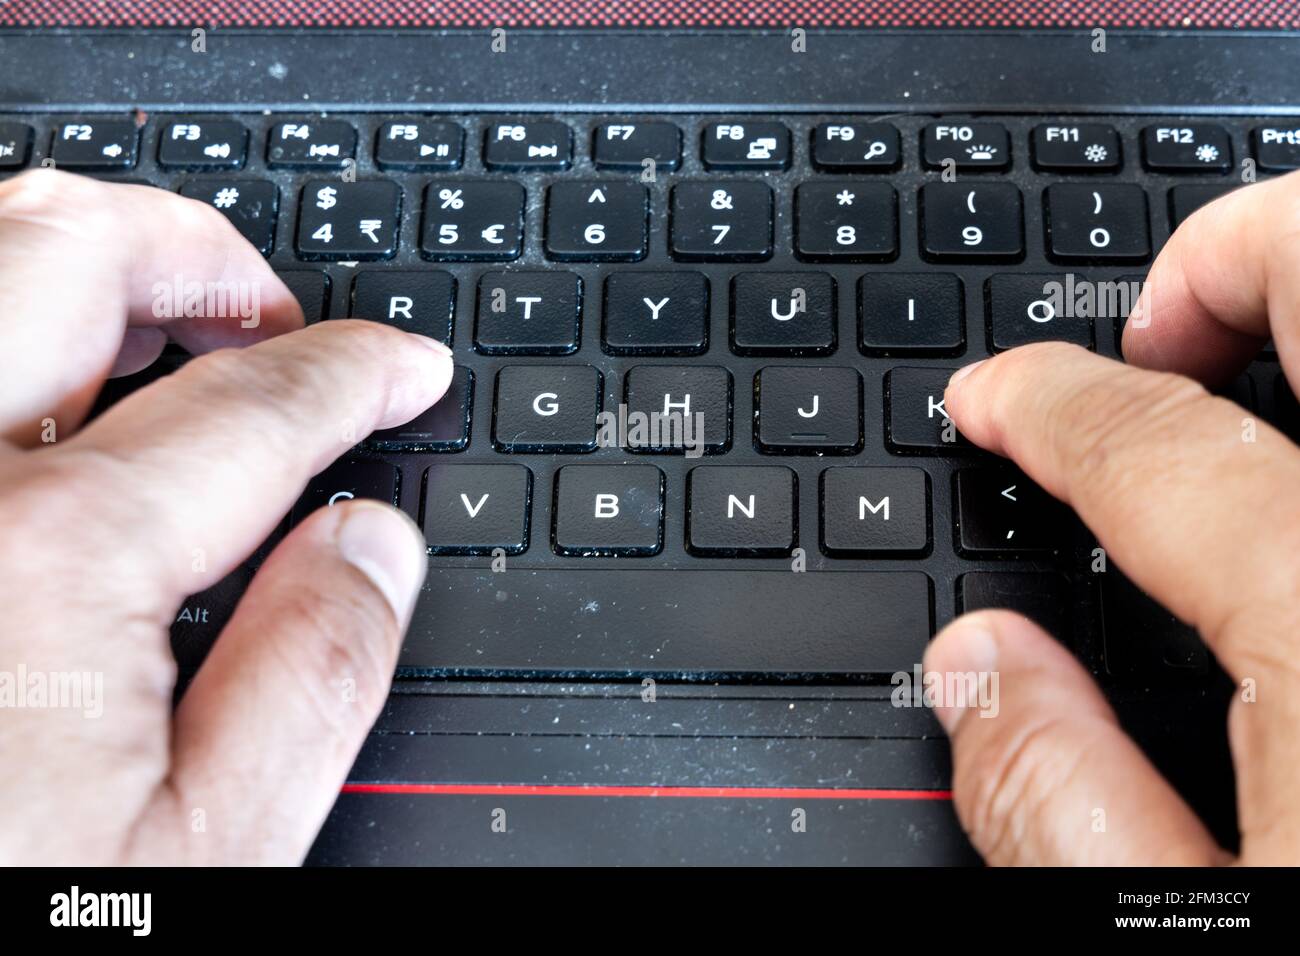 Fingers typing on laptop computer keyboard laced with dusk, particles and is very unhygienic and unhealthy Stock Photo